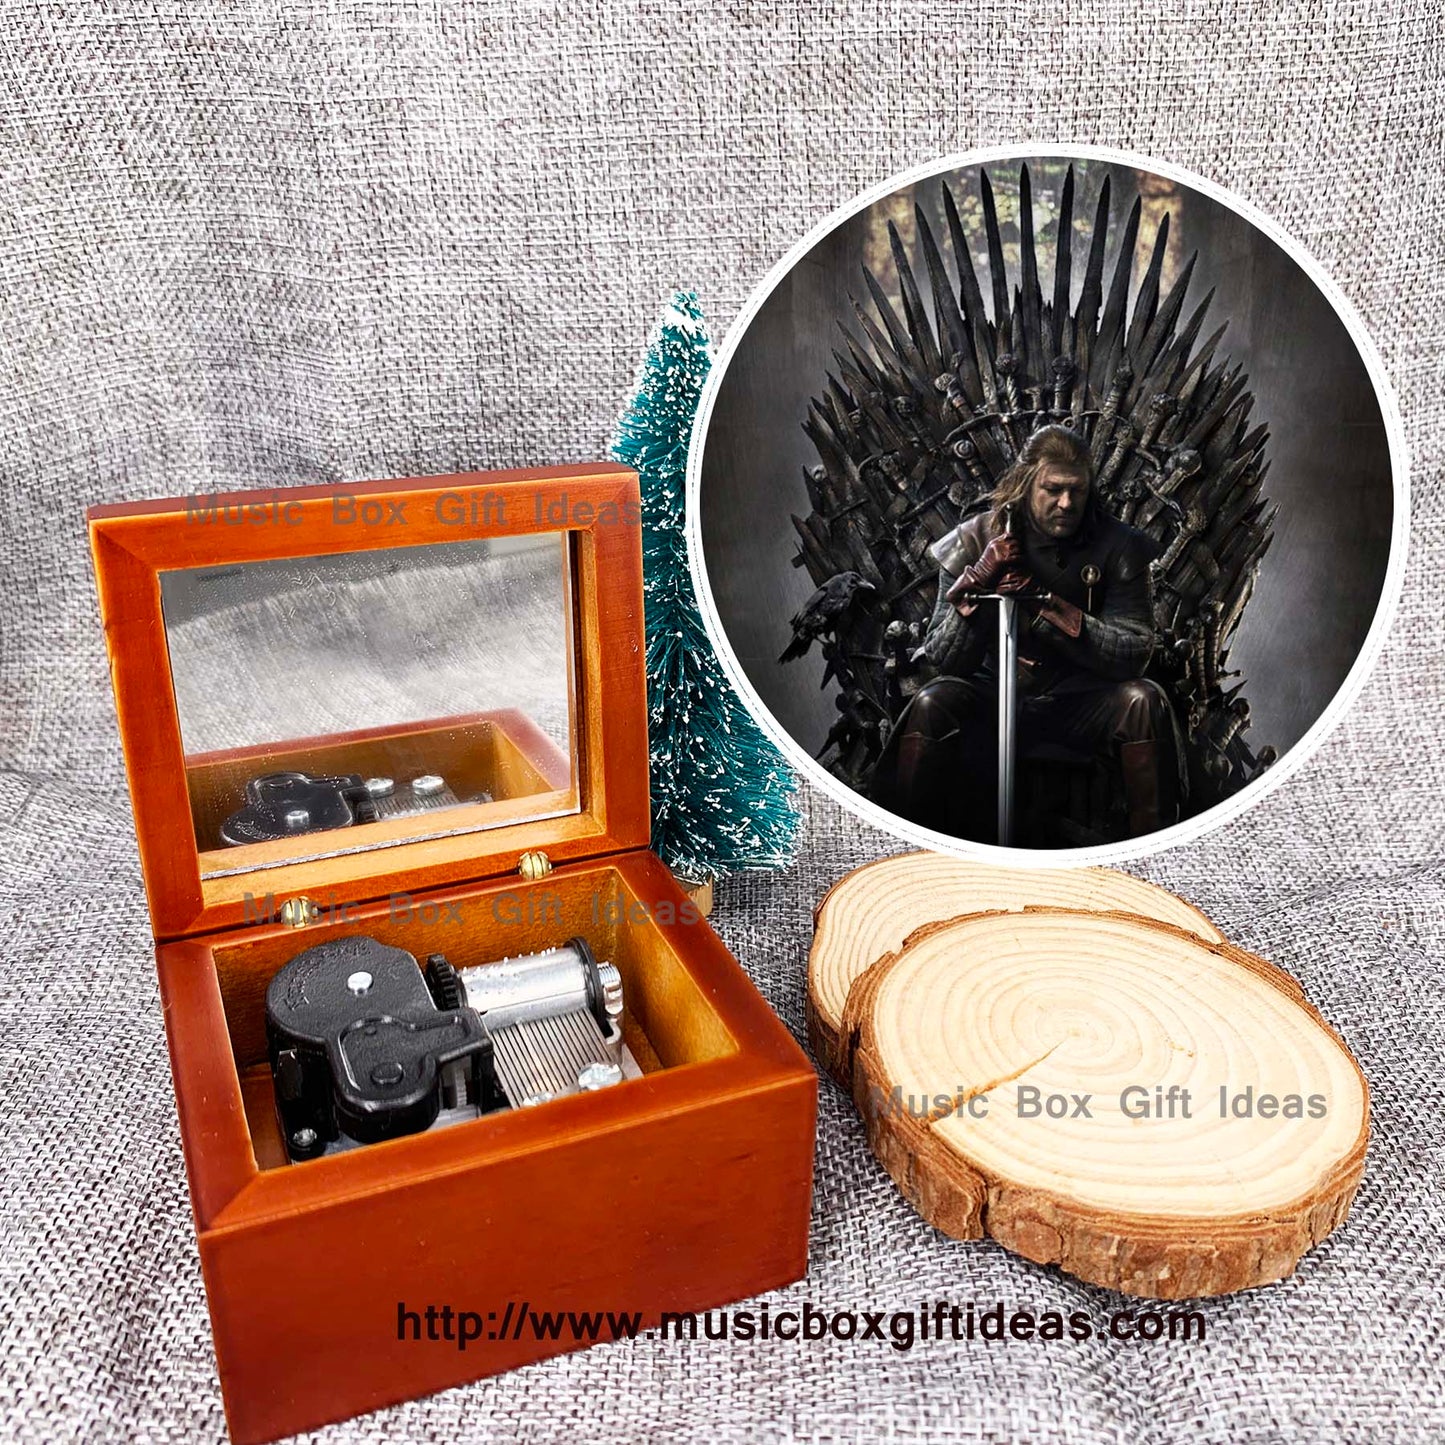 Game of Thrones Theme Song 18 Note Wooden Windup Music Box - Music Box Gift Ideas